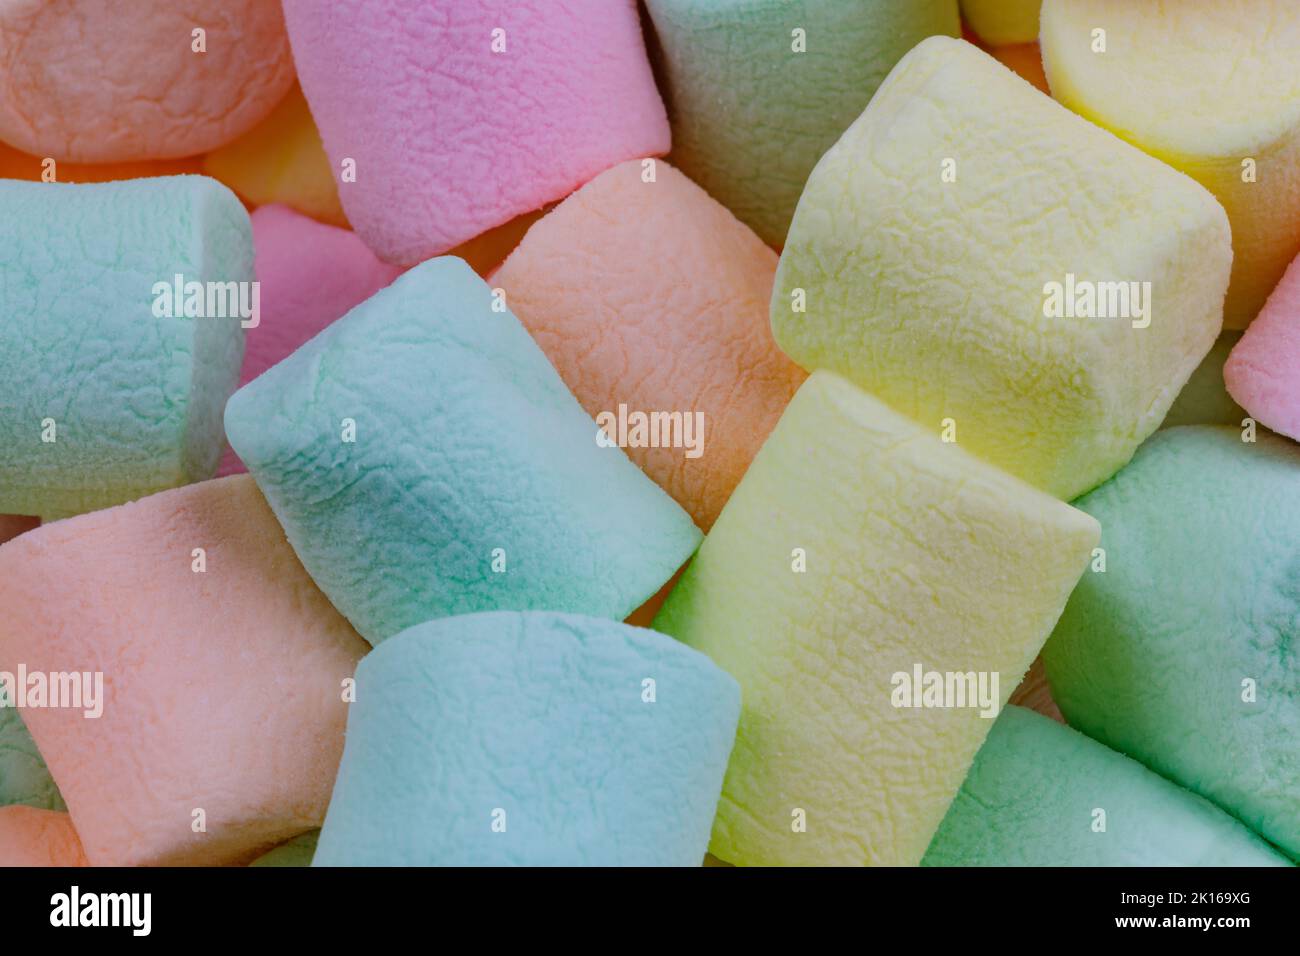 Close up background of some colorful pastal marshmallows Stock Photo